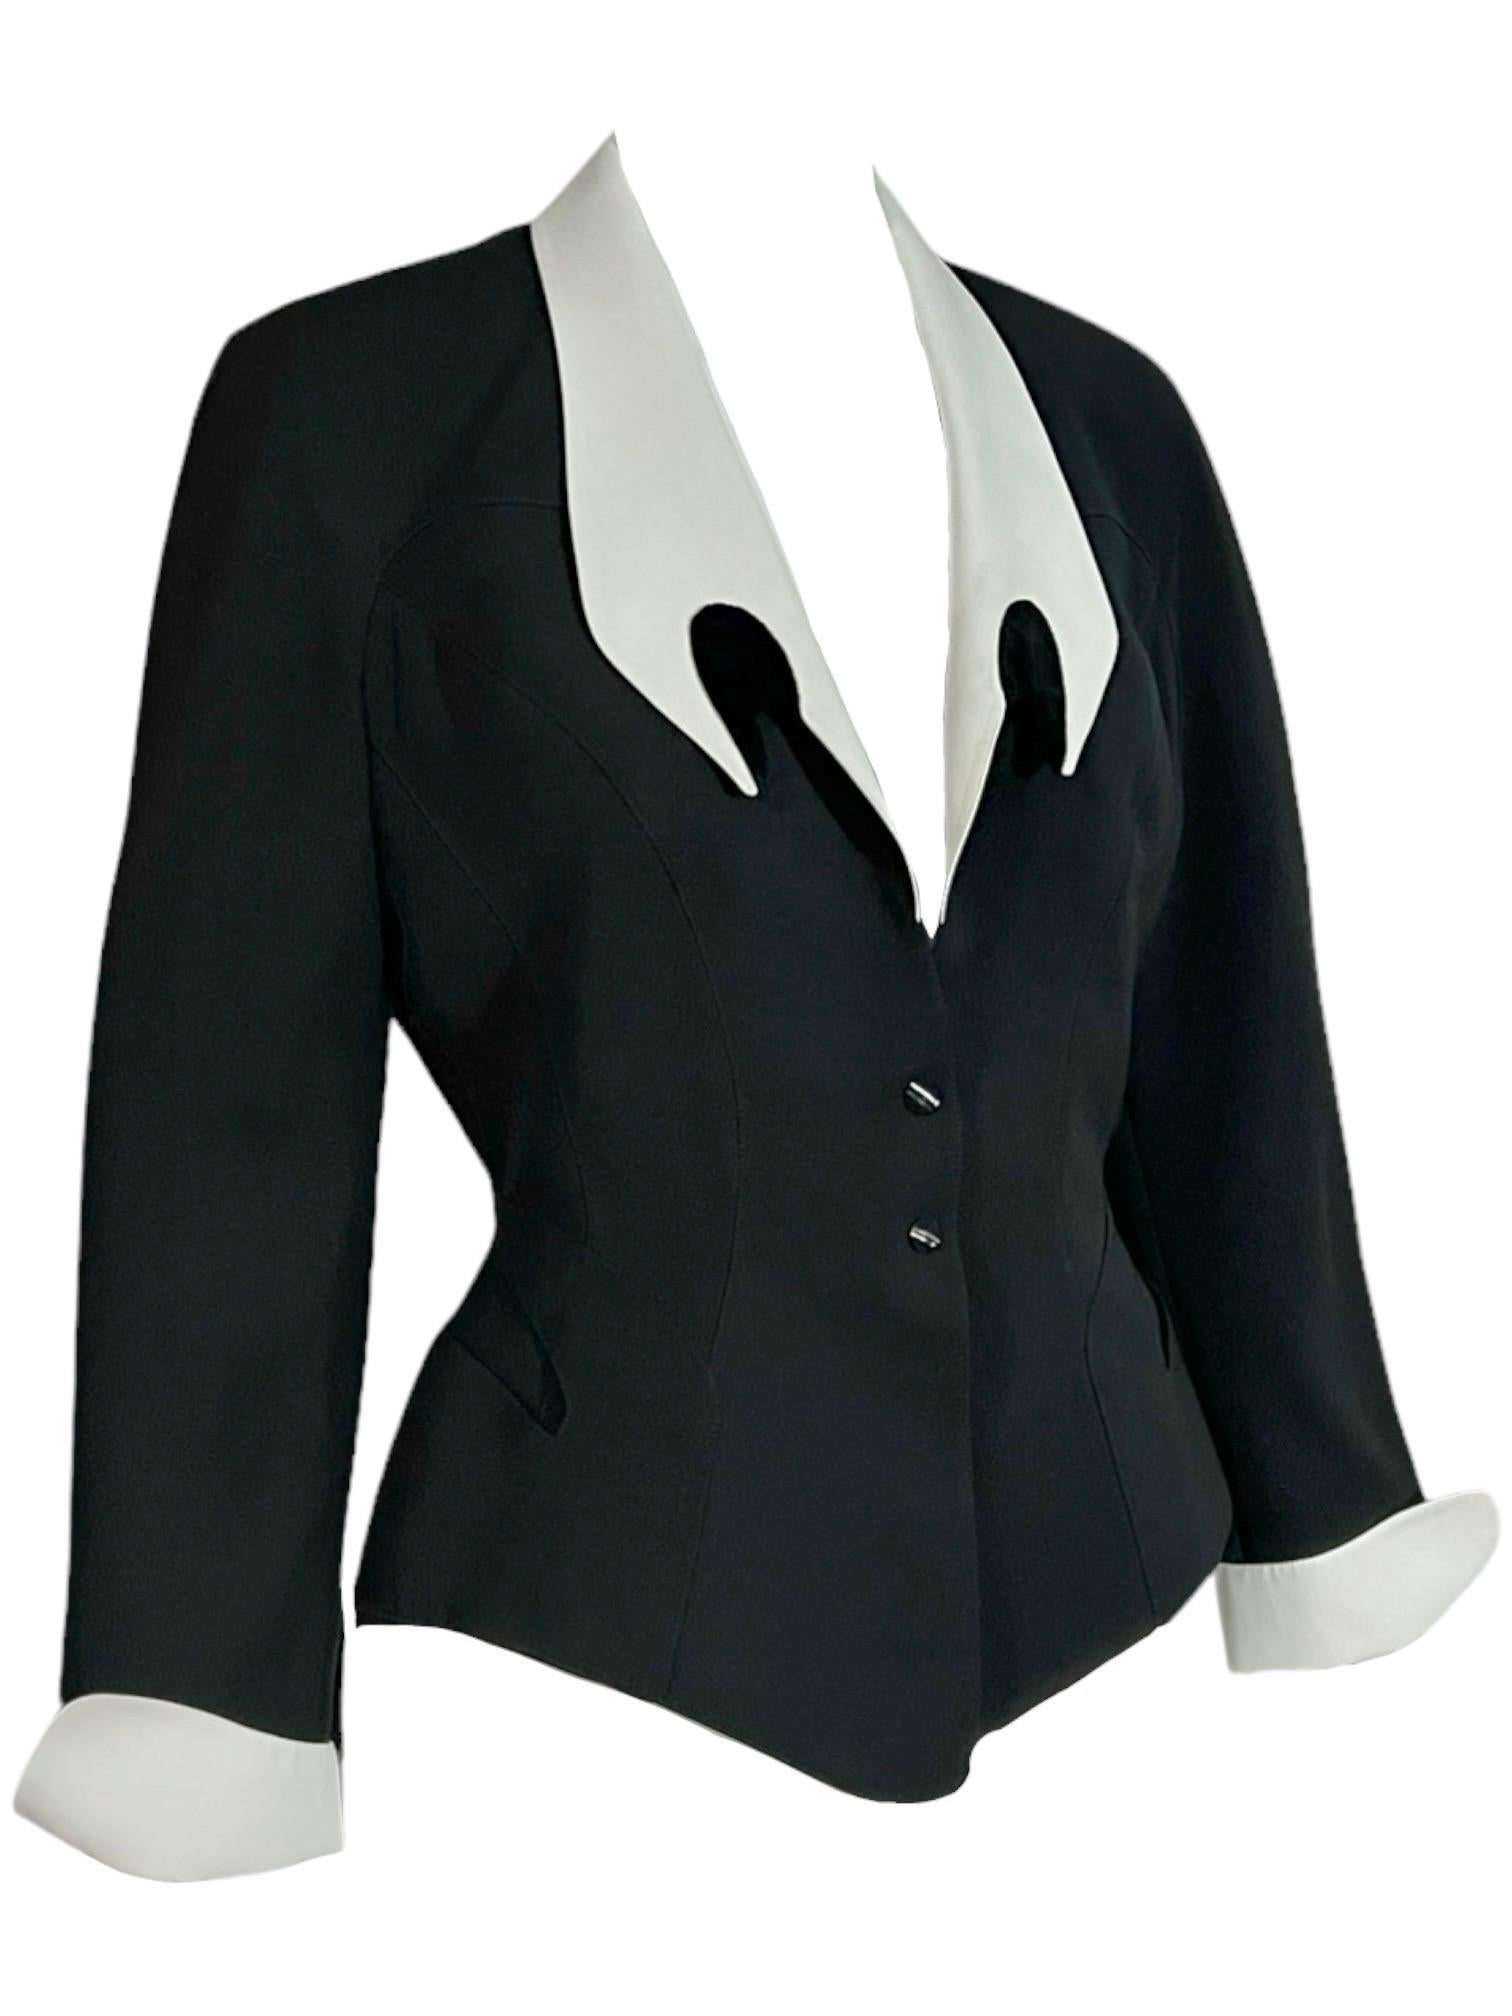 S/S 1992 Thierry Mugler Black Runway Jacket Dramatic White Collar In Excellent Condition For Sale In Concord, NC